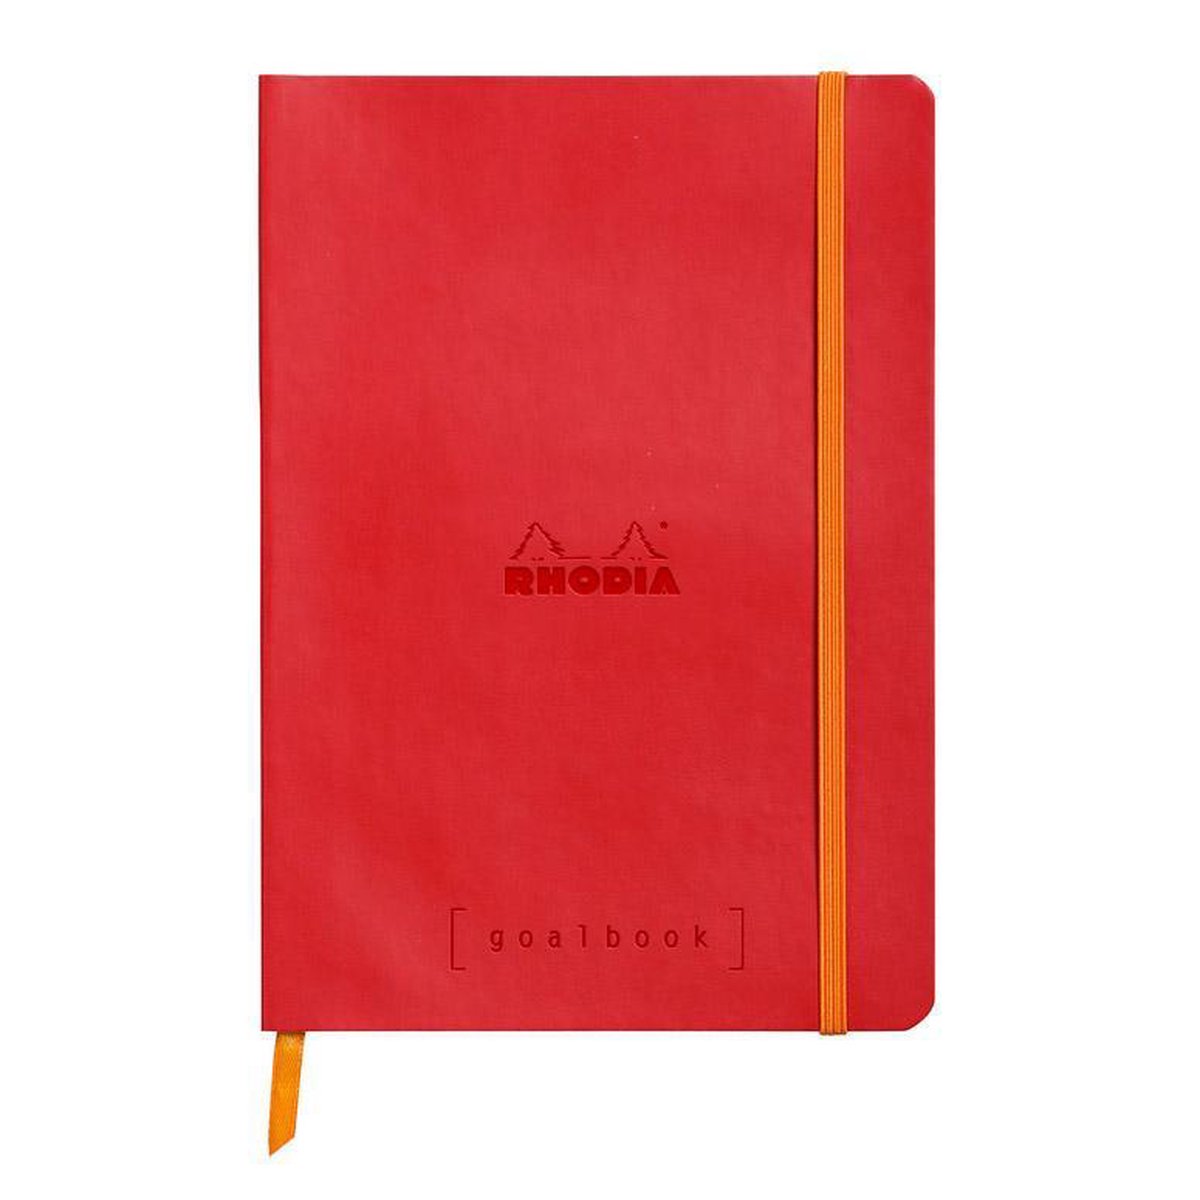 Rhodia Goalbook – Bullet Journal – A5 – 14,8x21cm – Softcover – Gestippeld – Dotted – Klaproosrood [Wit Papier]